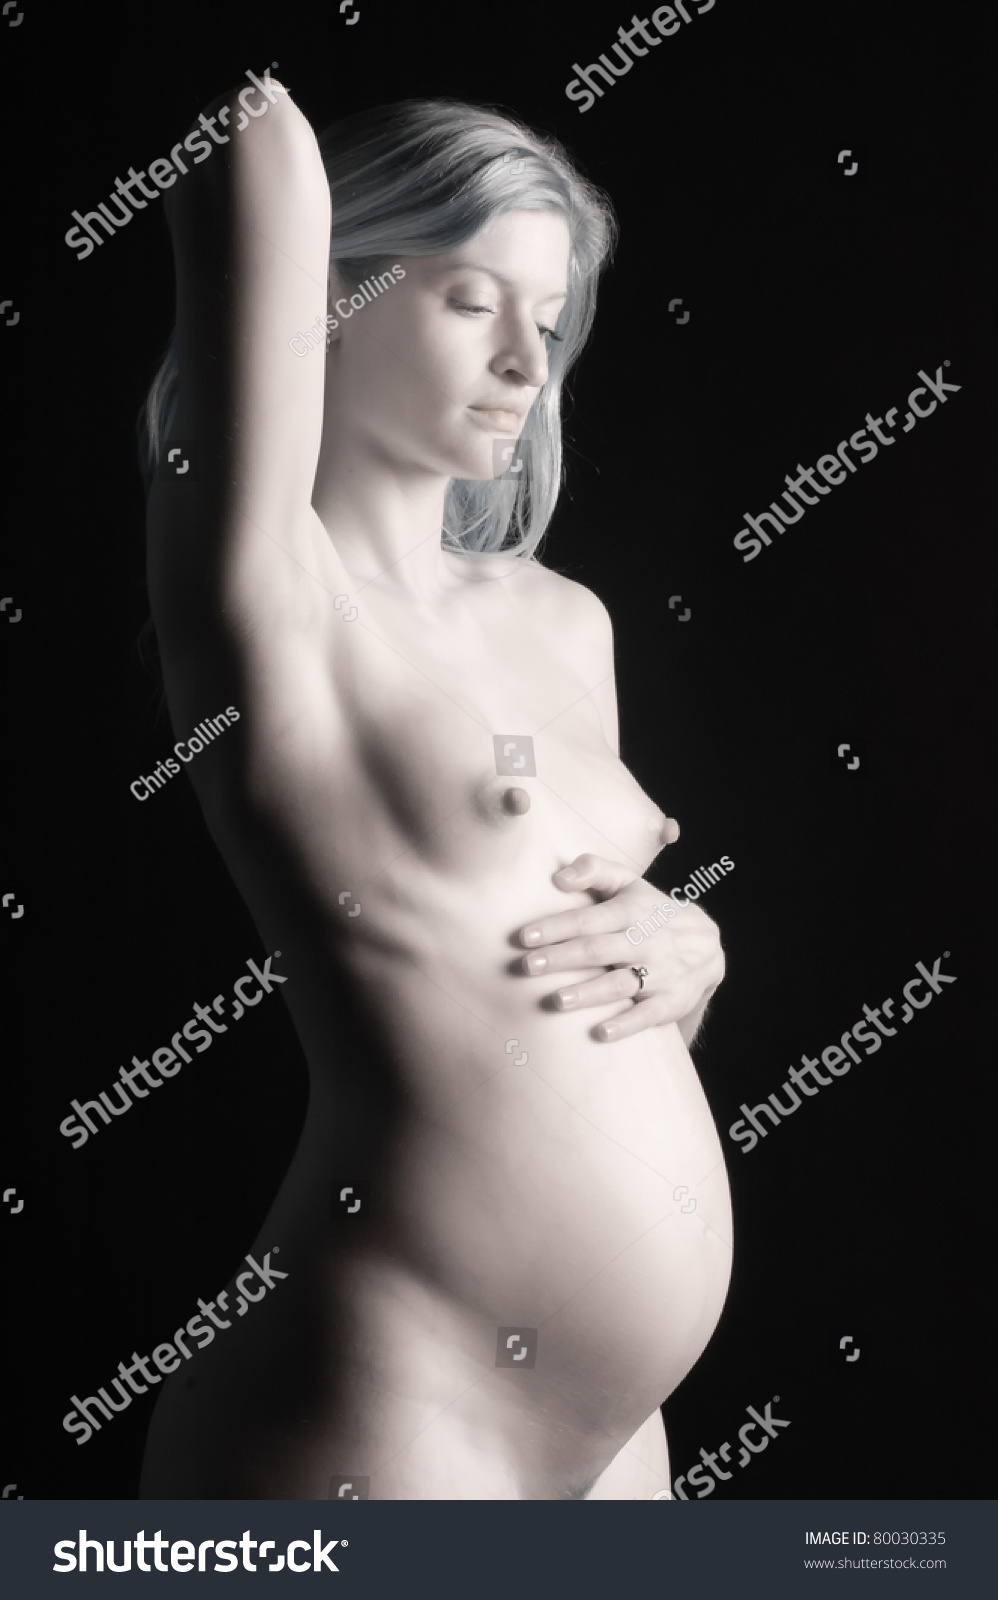 Nude Pictures Of Pregnant Women 10